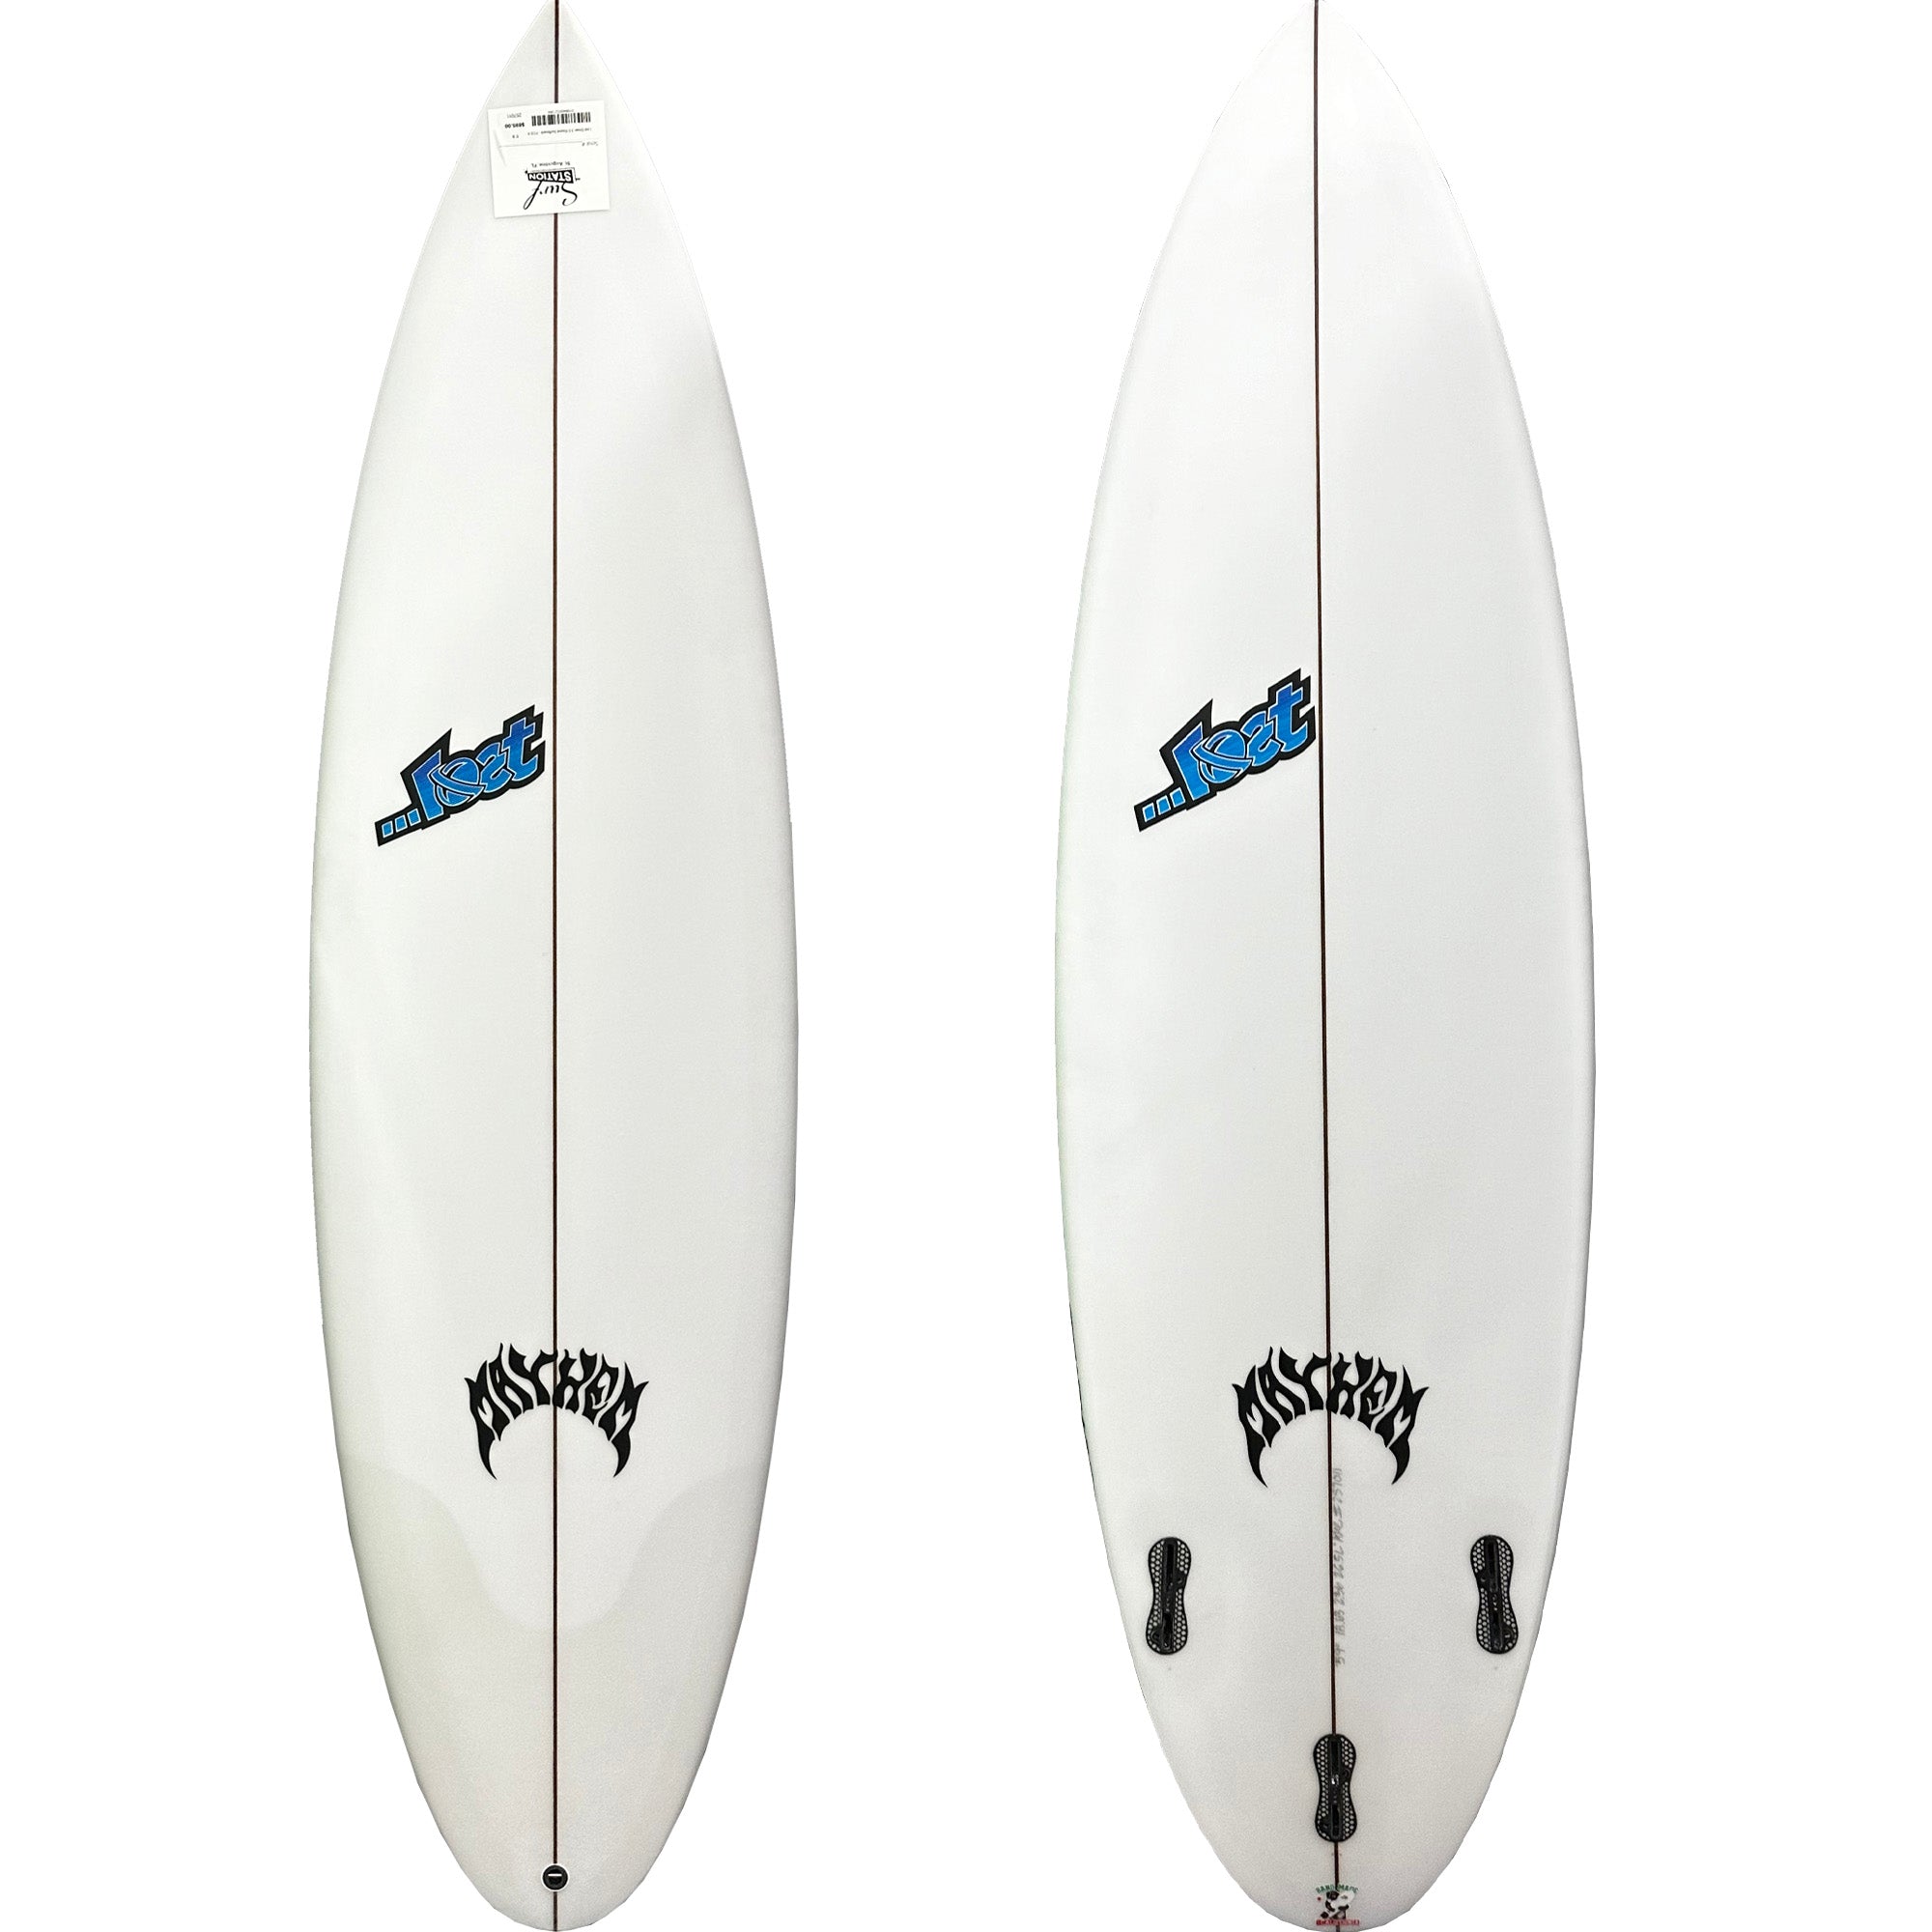 Lost Driver 3.0 Round Surfboard - FCS II